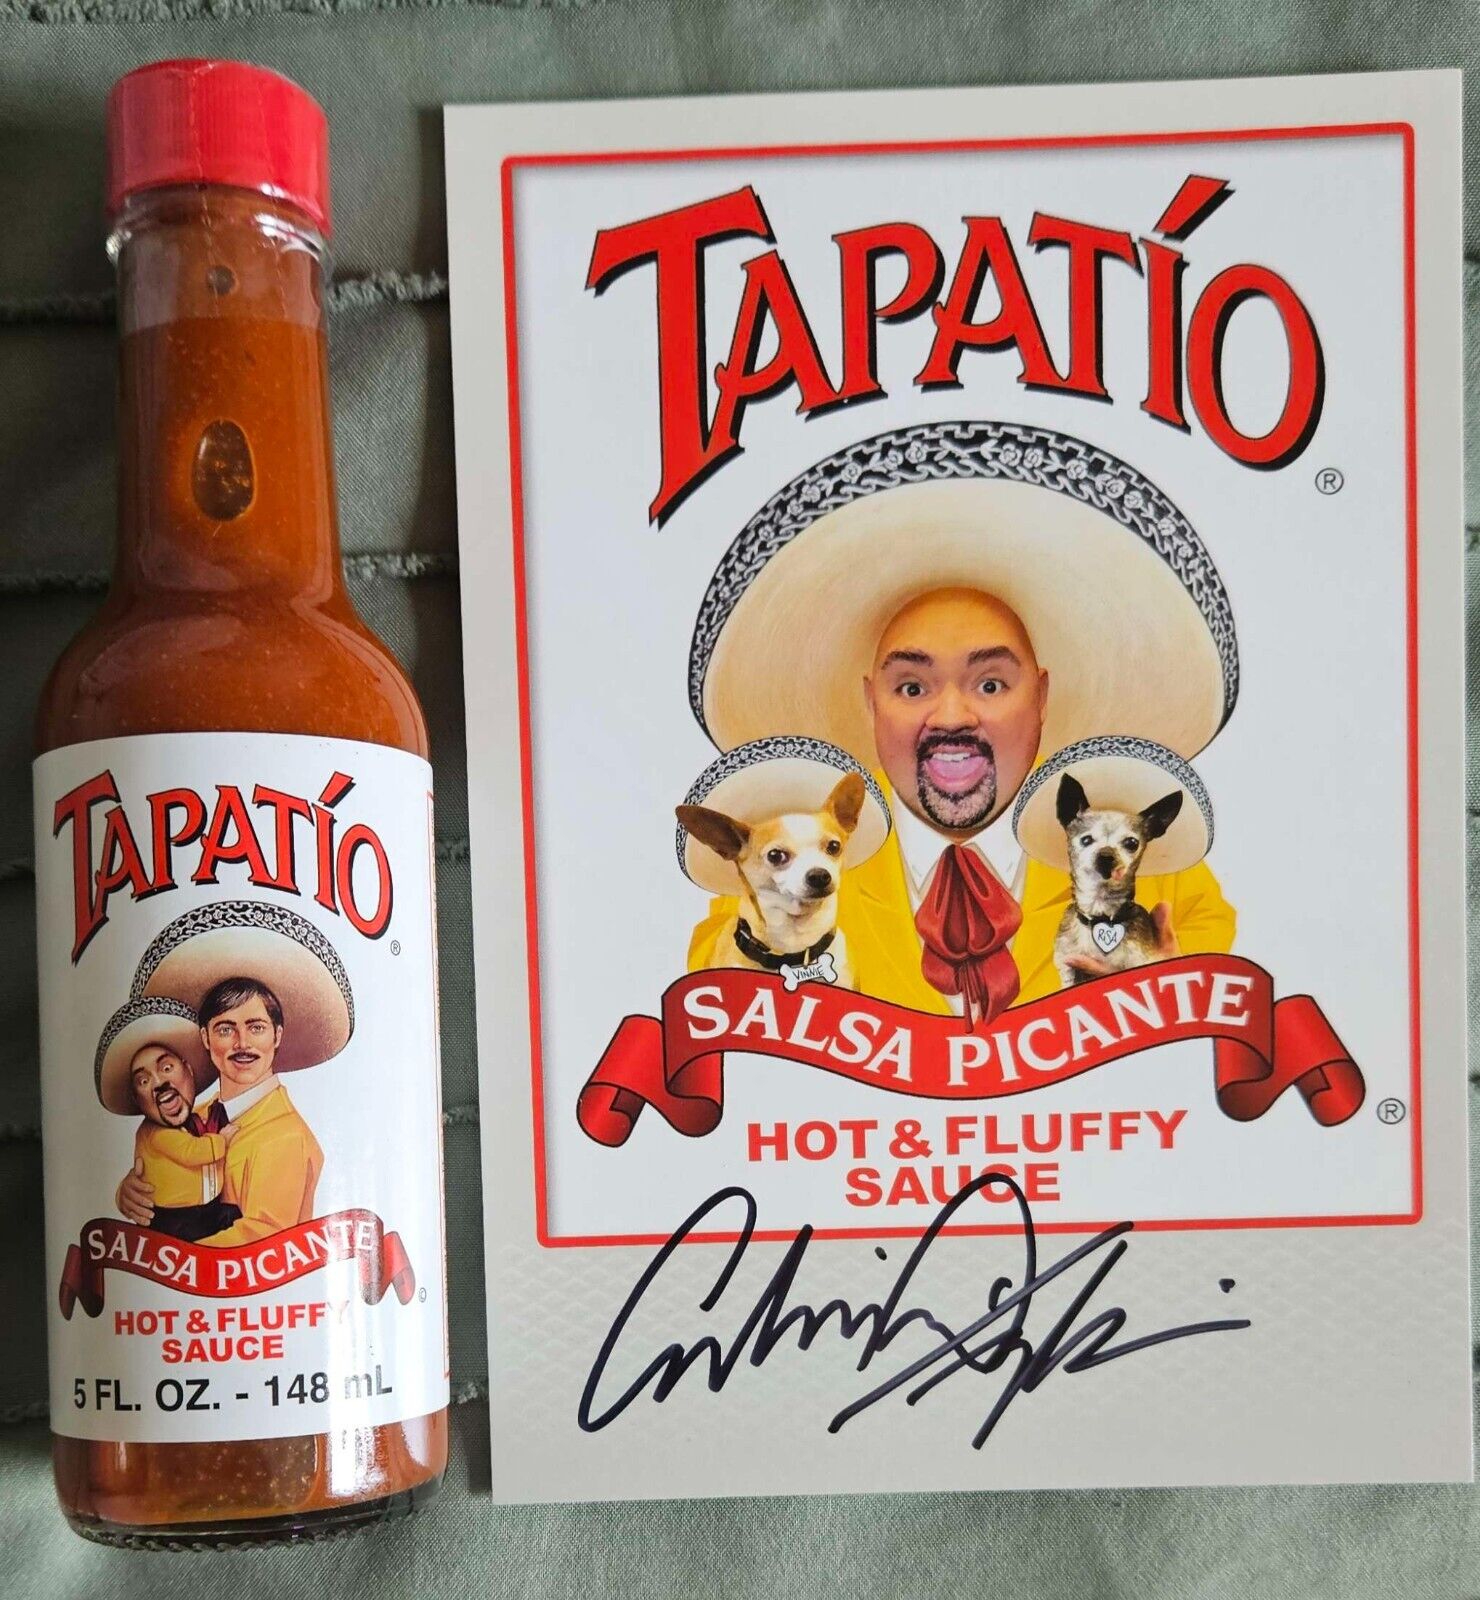 Gabriel Iglesias “Fluffy” Tapatio Sauce 5 Oz Bottle EXCLUSIVE Signed Cardstock